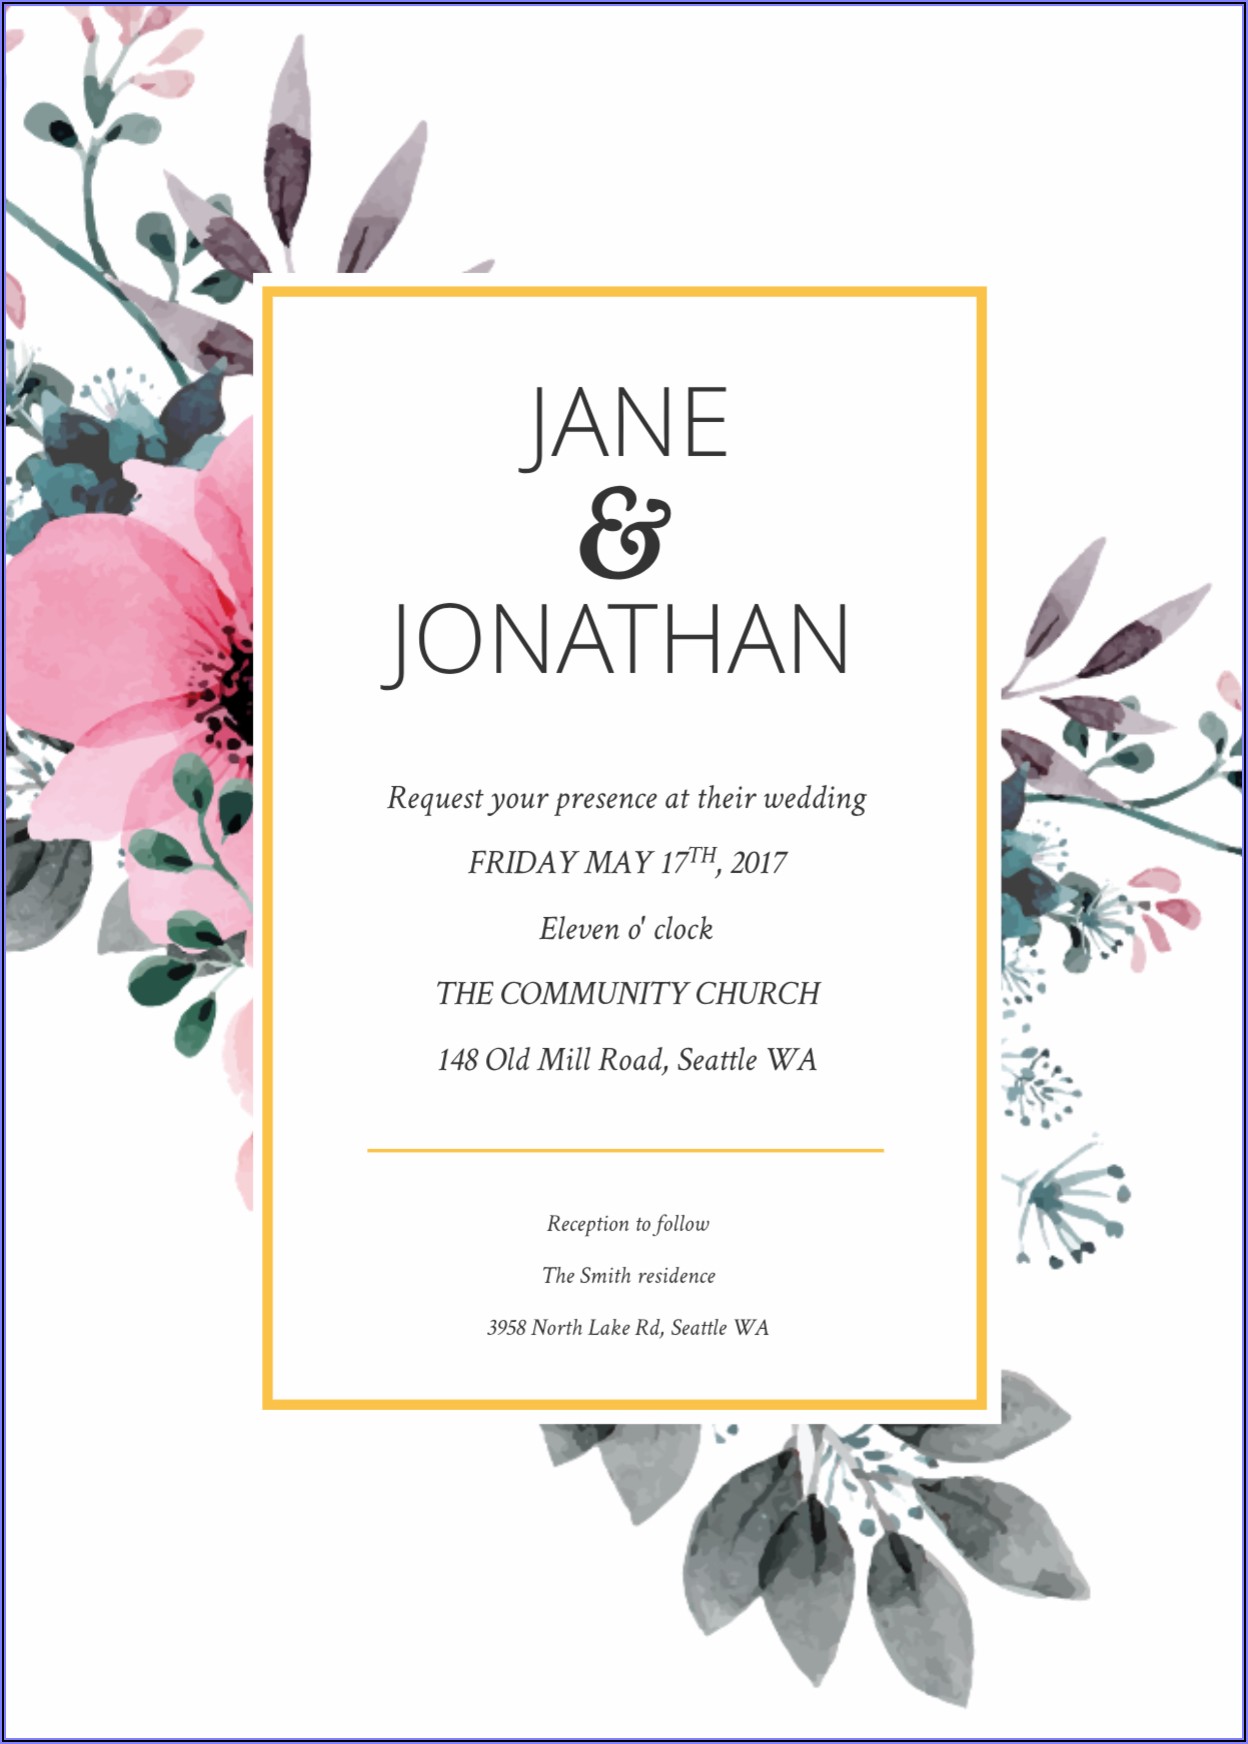 Personalized Wedding Invitations Online Free